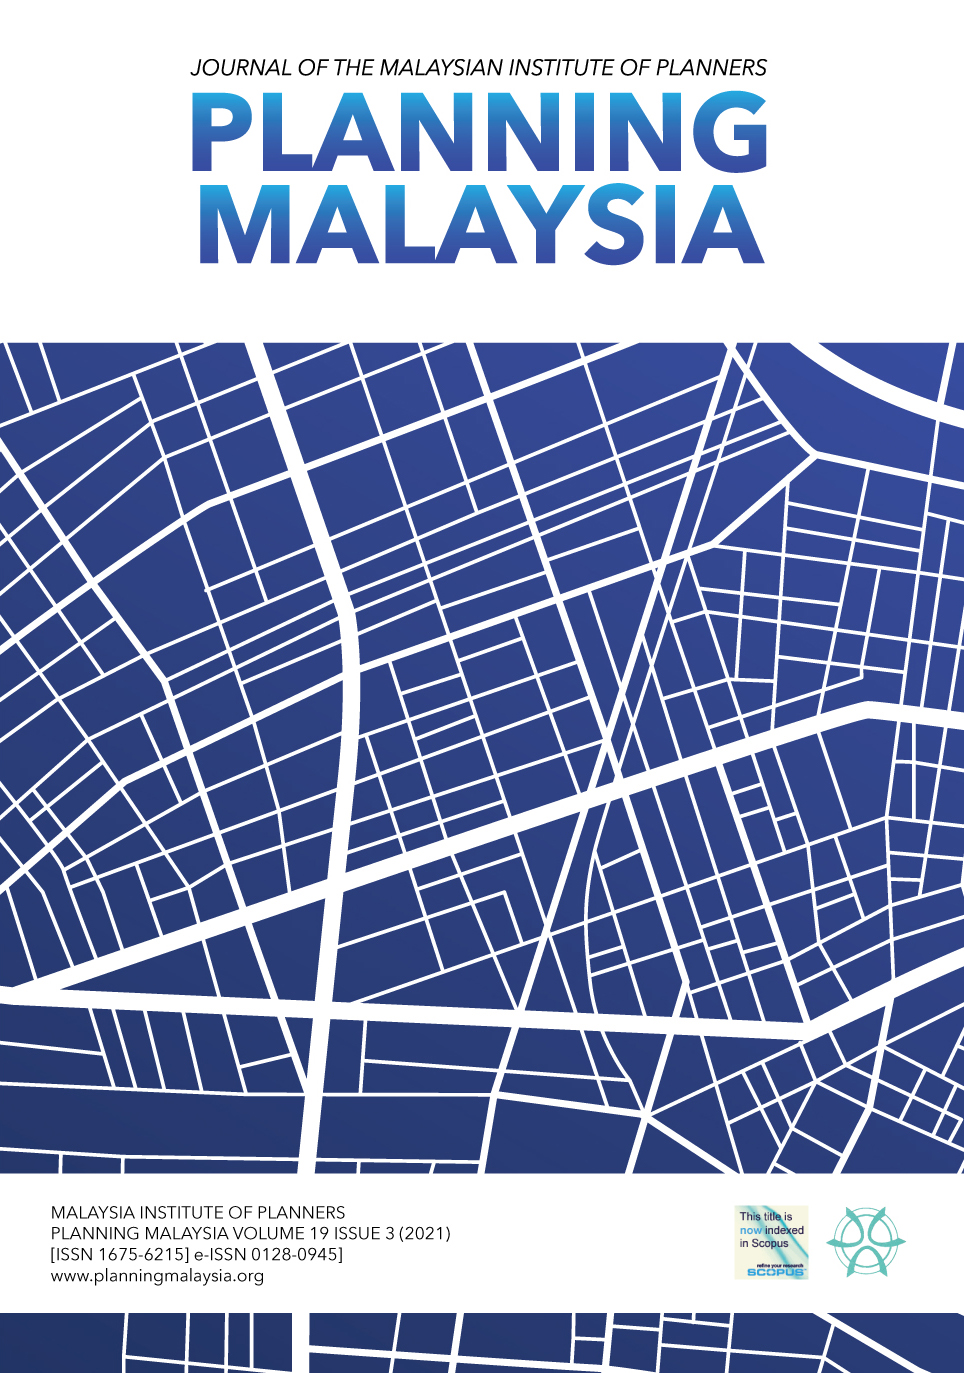 					View Vol. 19 (2021): PLANNING MALAYSIA JOURNAL : Volume 19, Issue 3, 2021
				